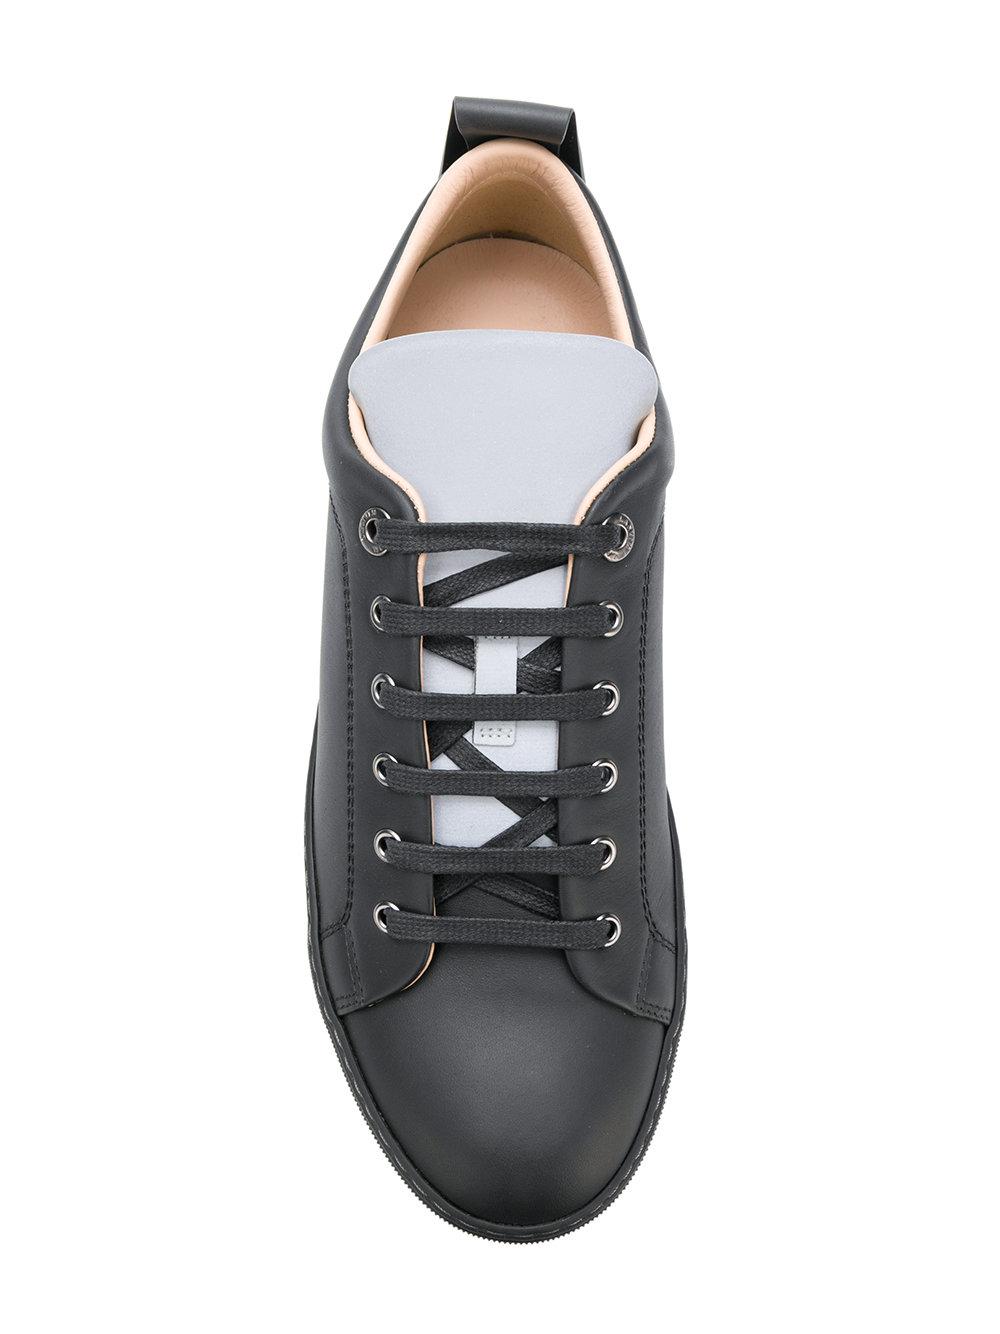 Lanvin Rubber Reflective Tongue Sneakers in Black for Men | Lyst